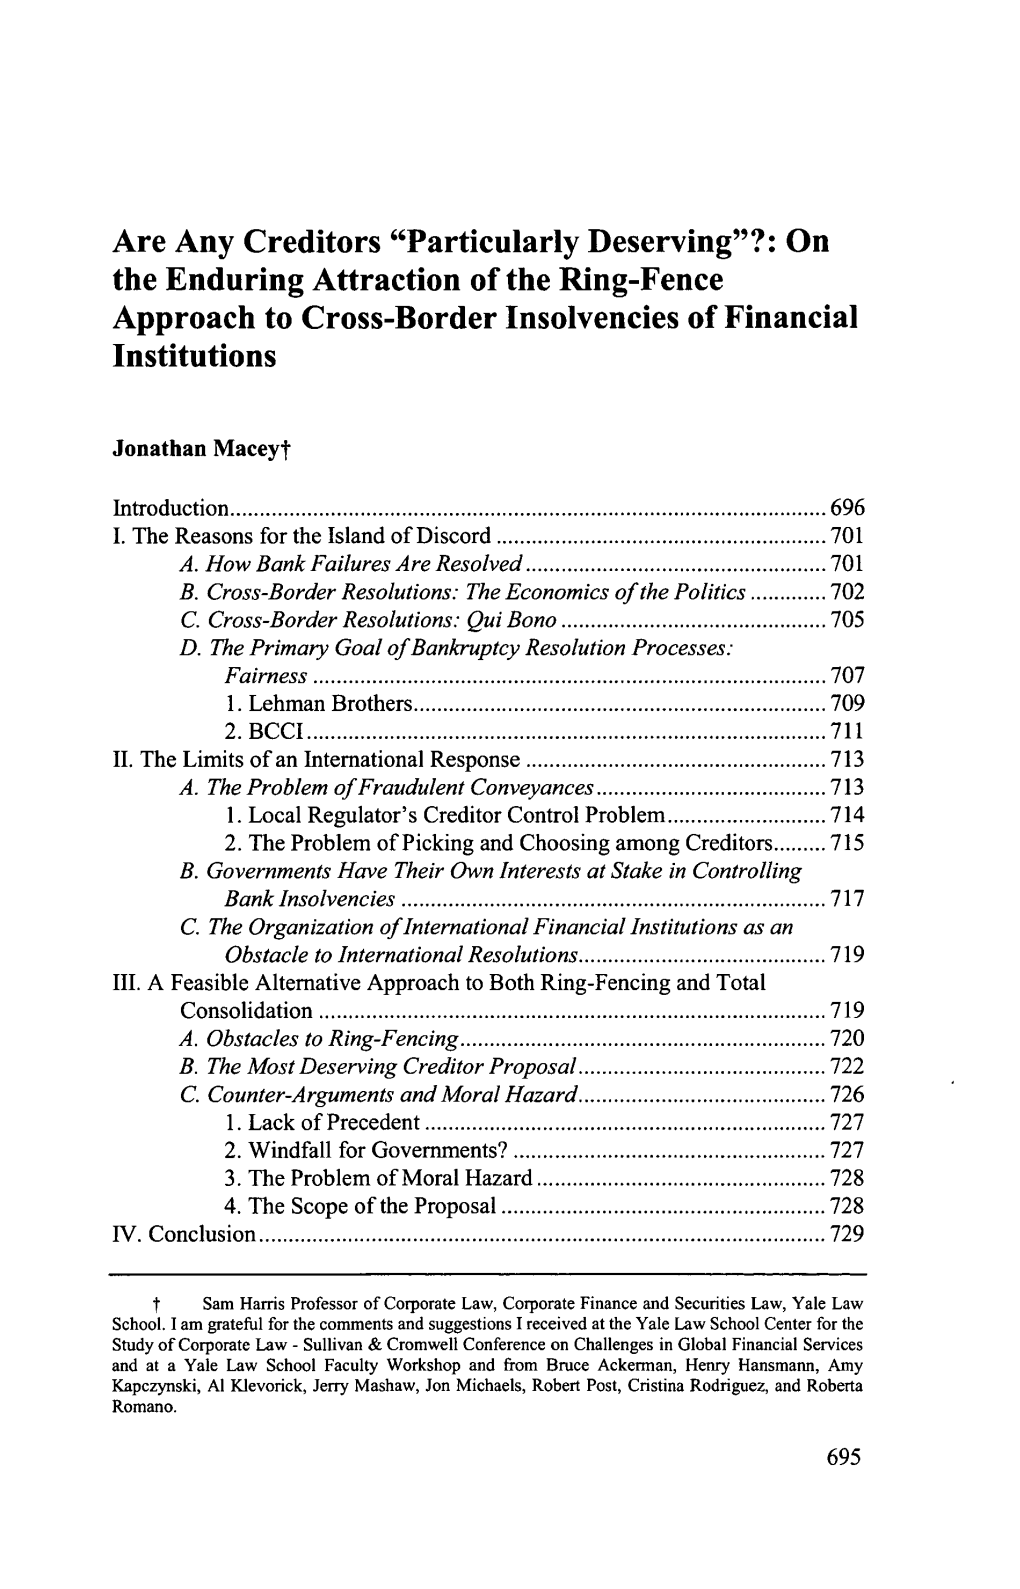 Are Any Creditors "Particularly Deserving"?: on the Enduring Attraction of the Ring-Fence Approach to Cross-Border Insolvencies of Financial Institutions